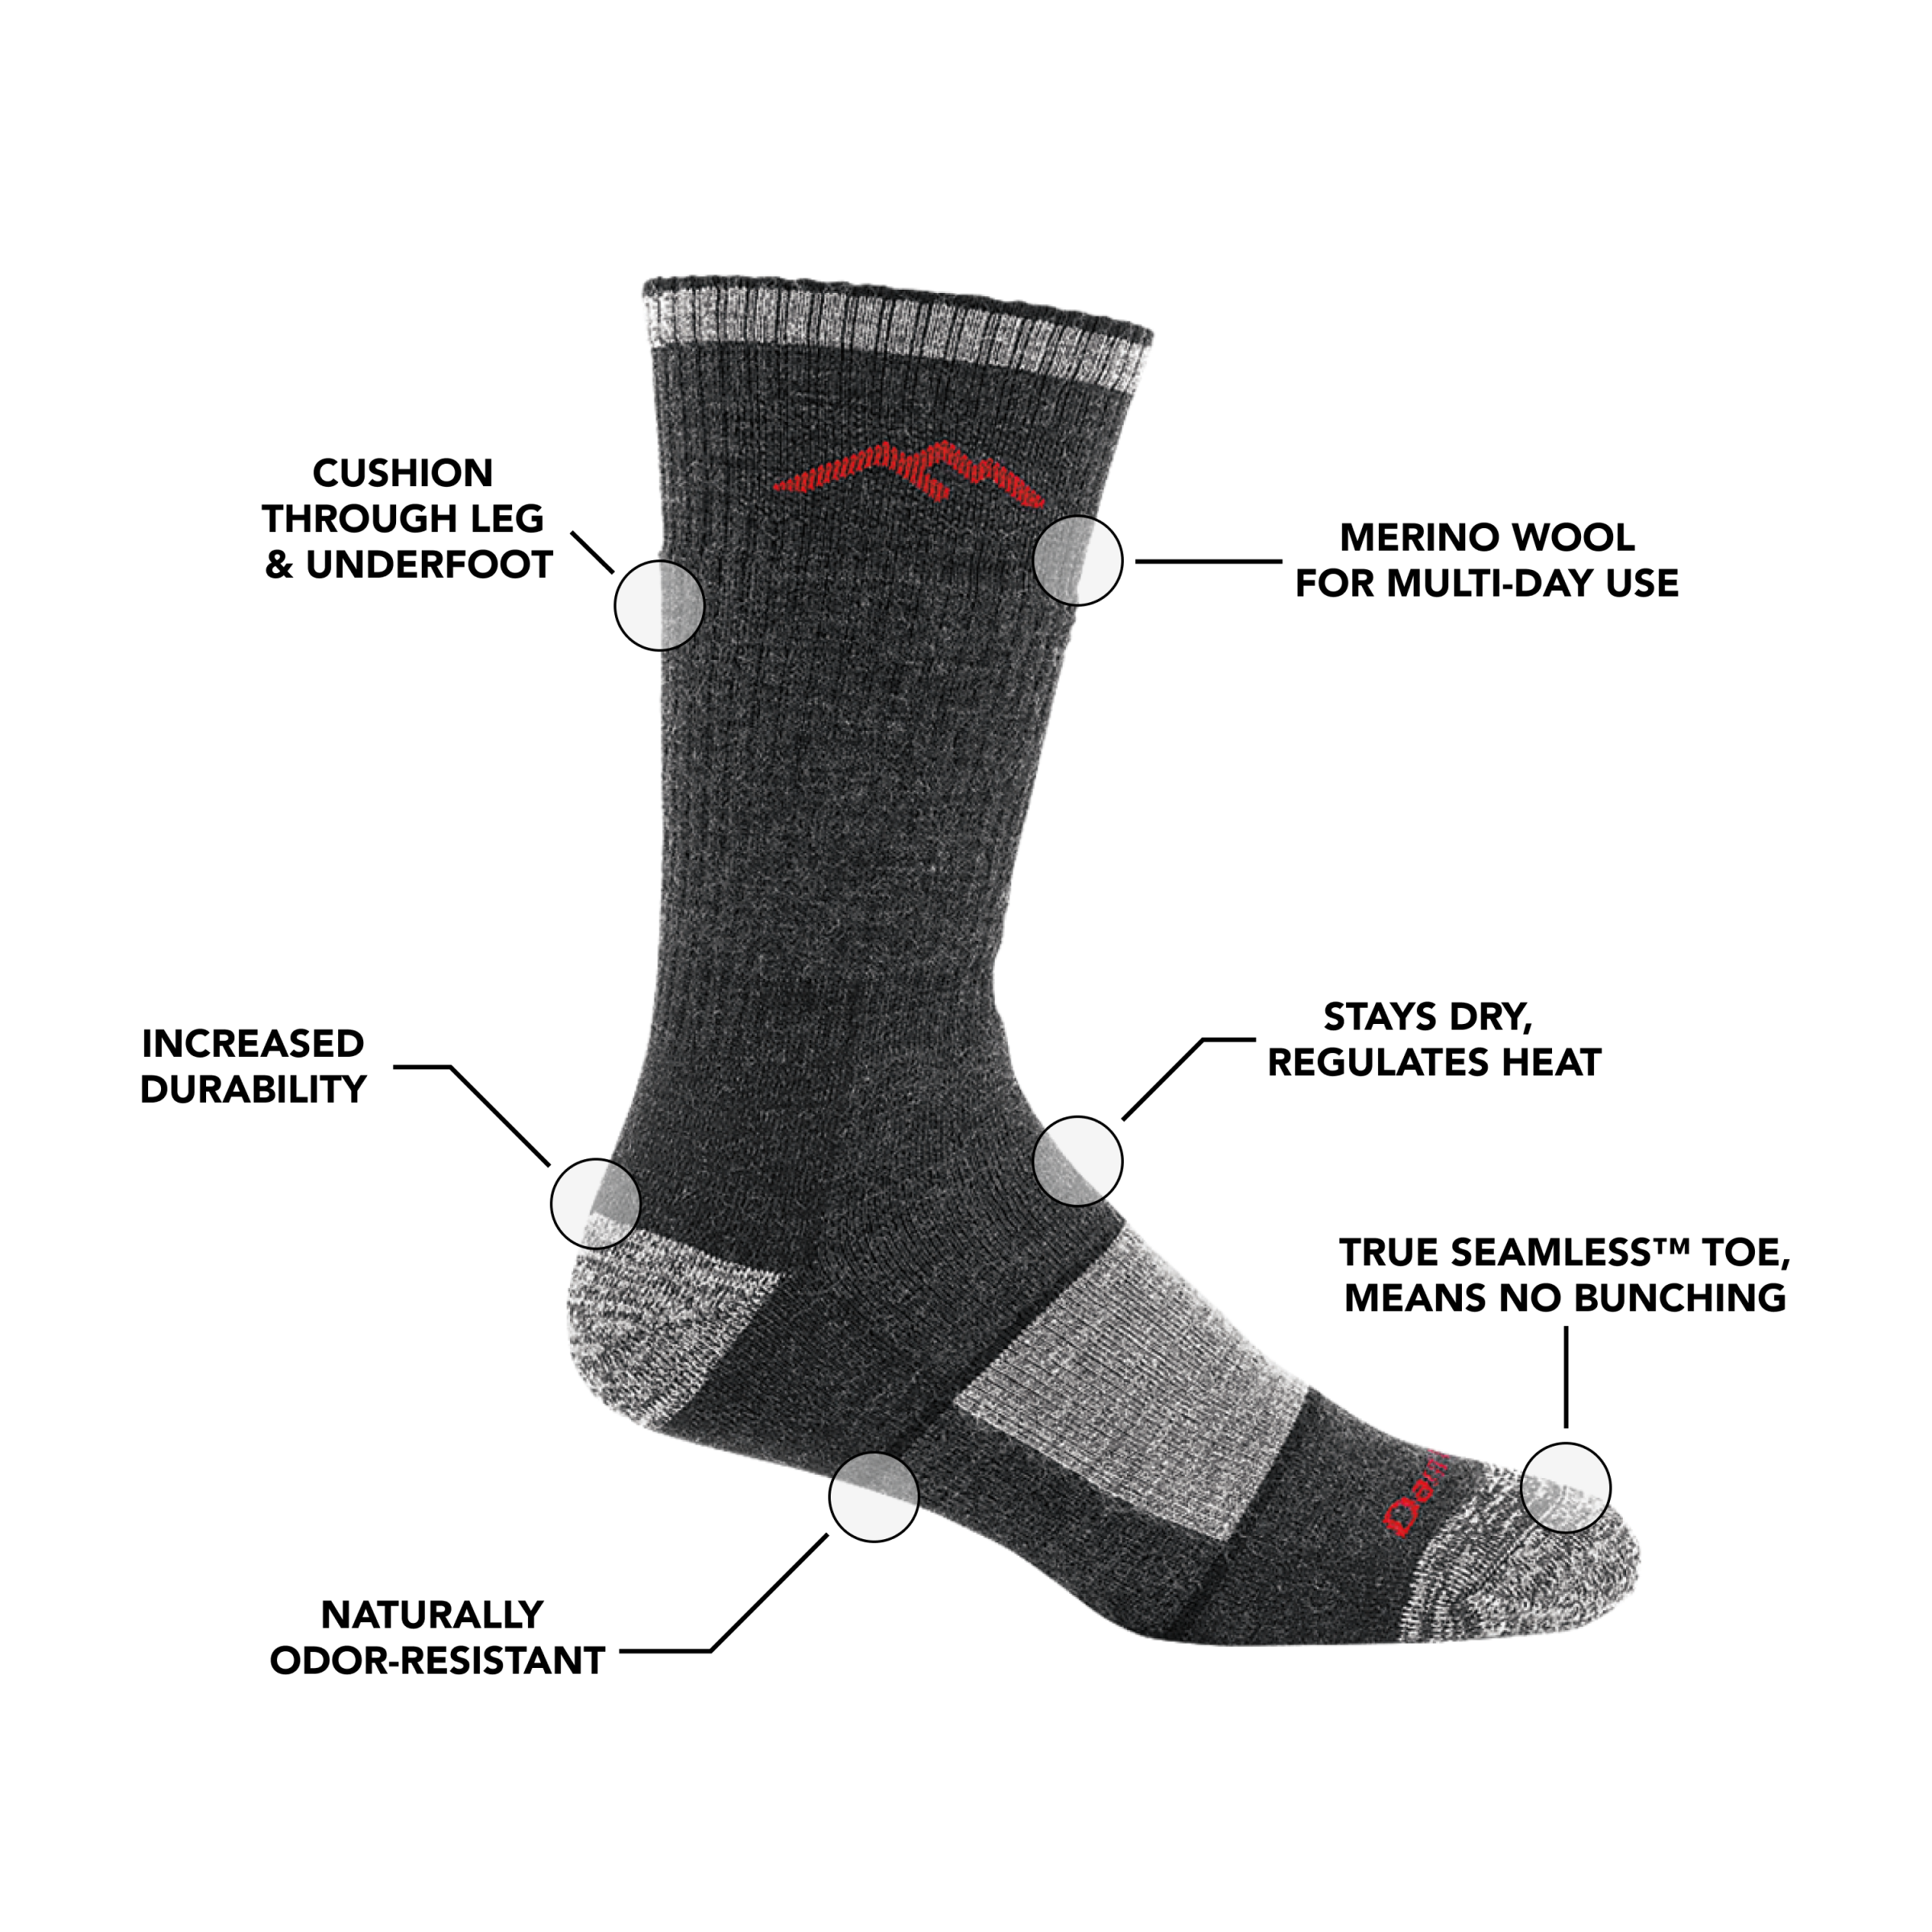 Image of Men's Hiker Boot sock calling out all of it's features and benefits